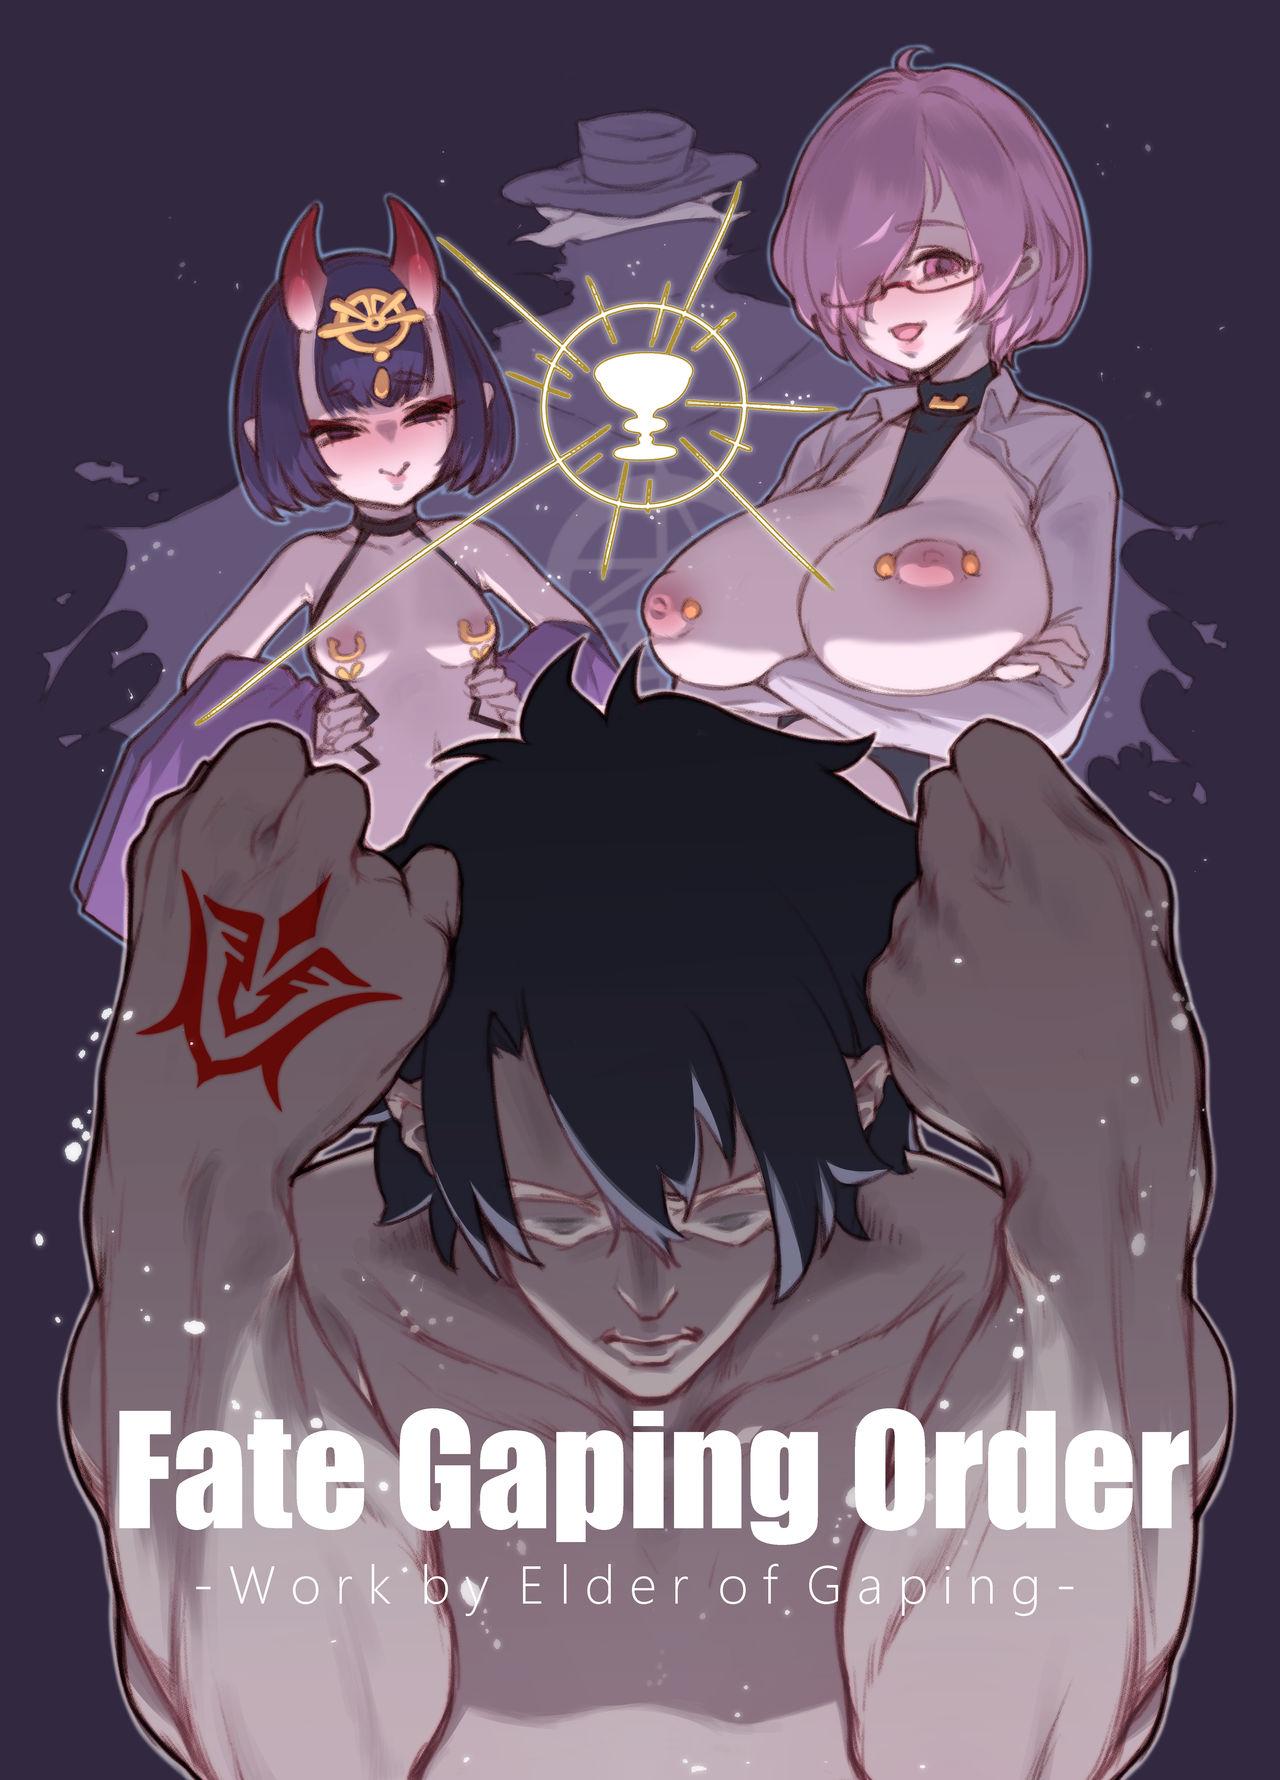 Fate Gaping Order 0